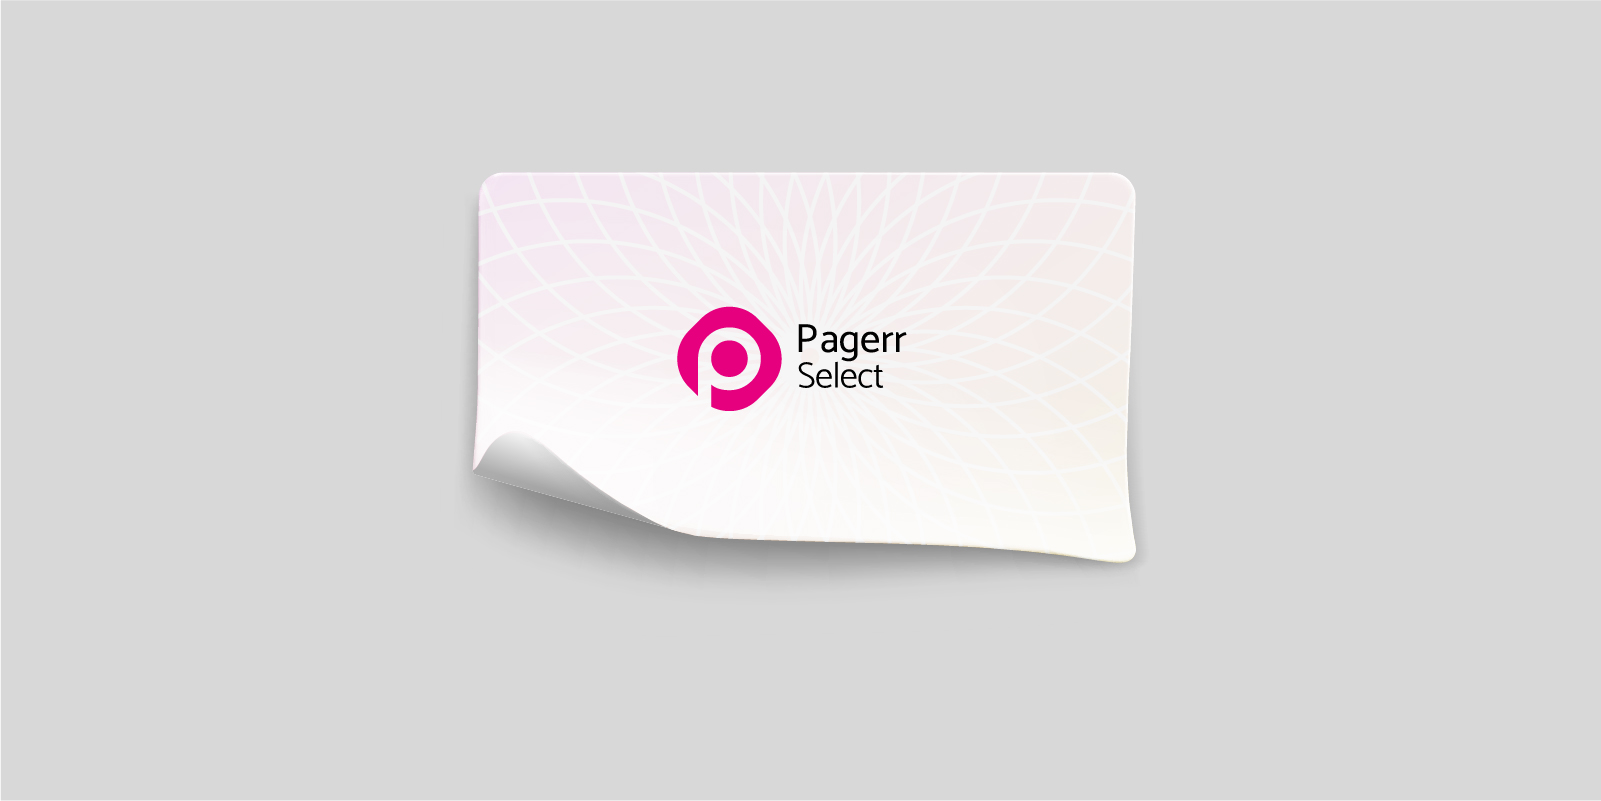 Sheet stickers in Hamburg - Print with Pagerr